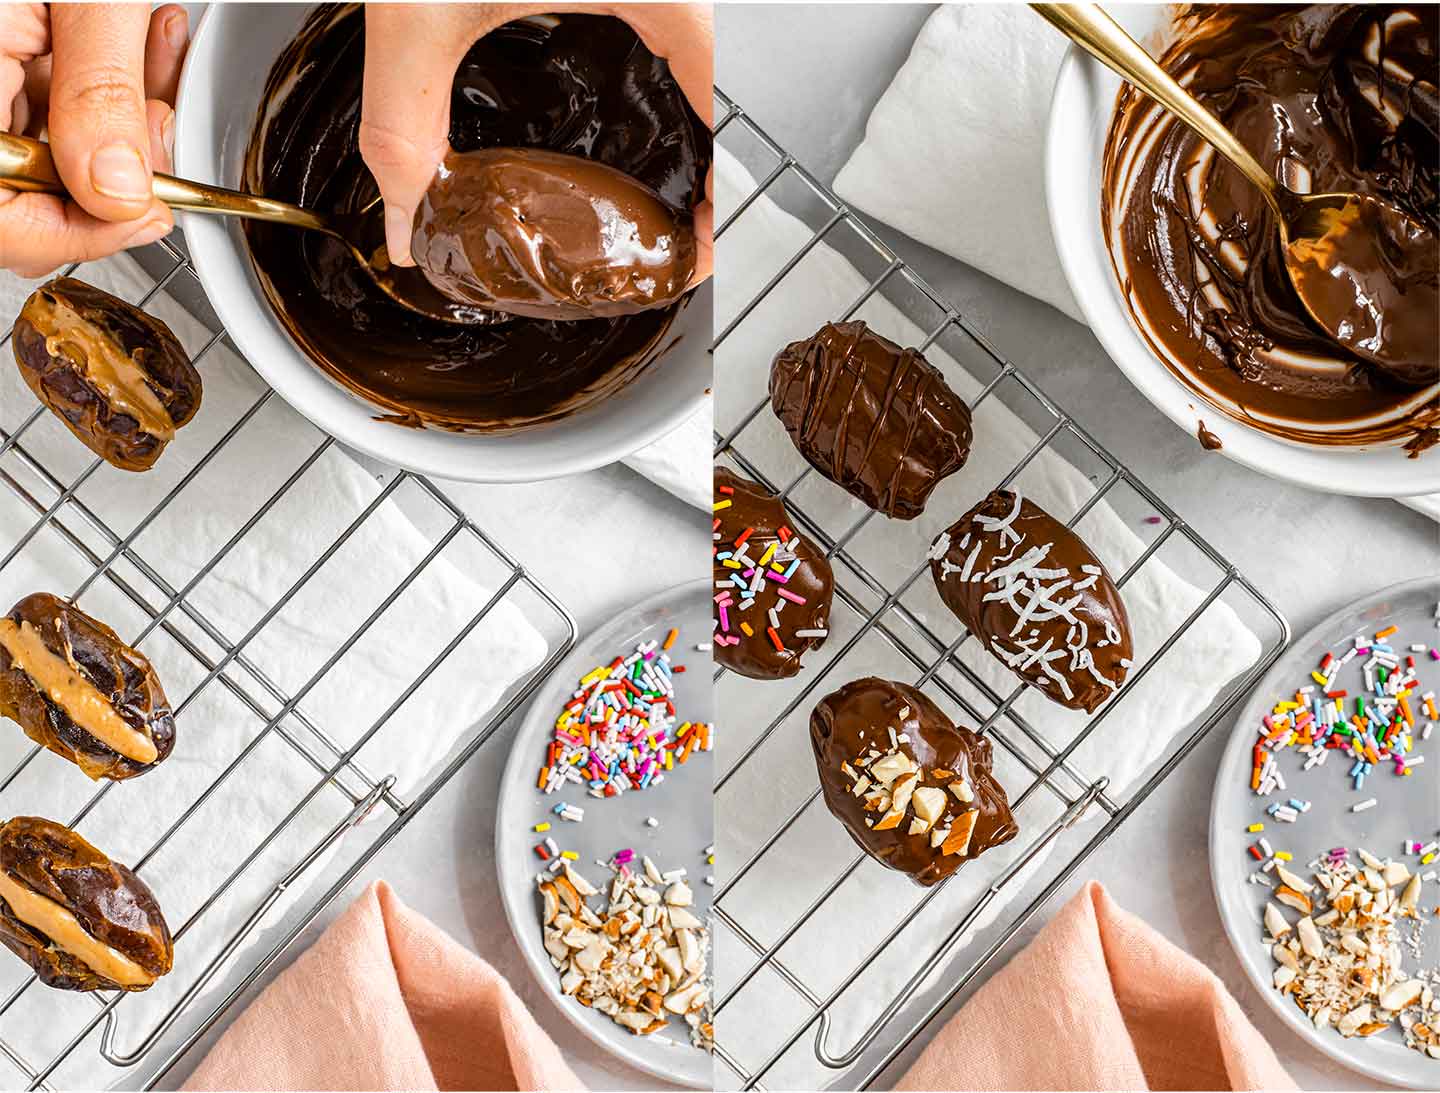 Grid of two process photos. A chocolate covered date is lifted from a bowl of melted chocolate and the excess drips off. Chocolate covered dates rest on a wire rack and are garnished with sprinkles, coconut flakes, and flaked almonds.